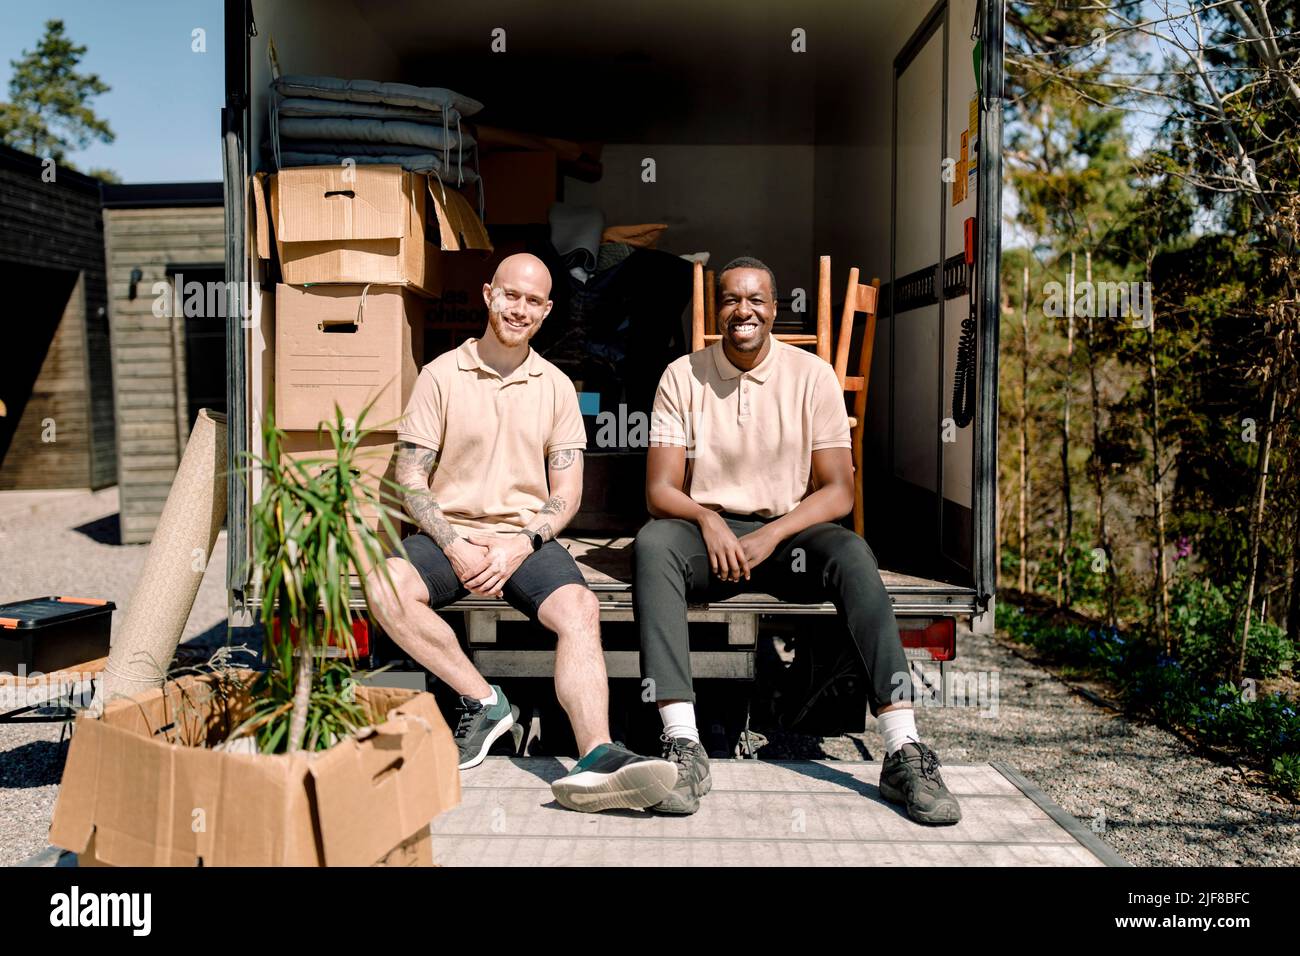 Delivery company employees smiling while sitting in truck on sunny day Stock Photo